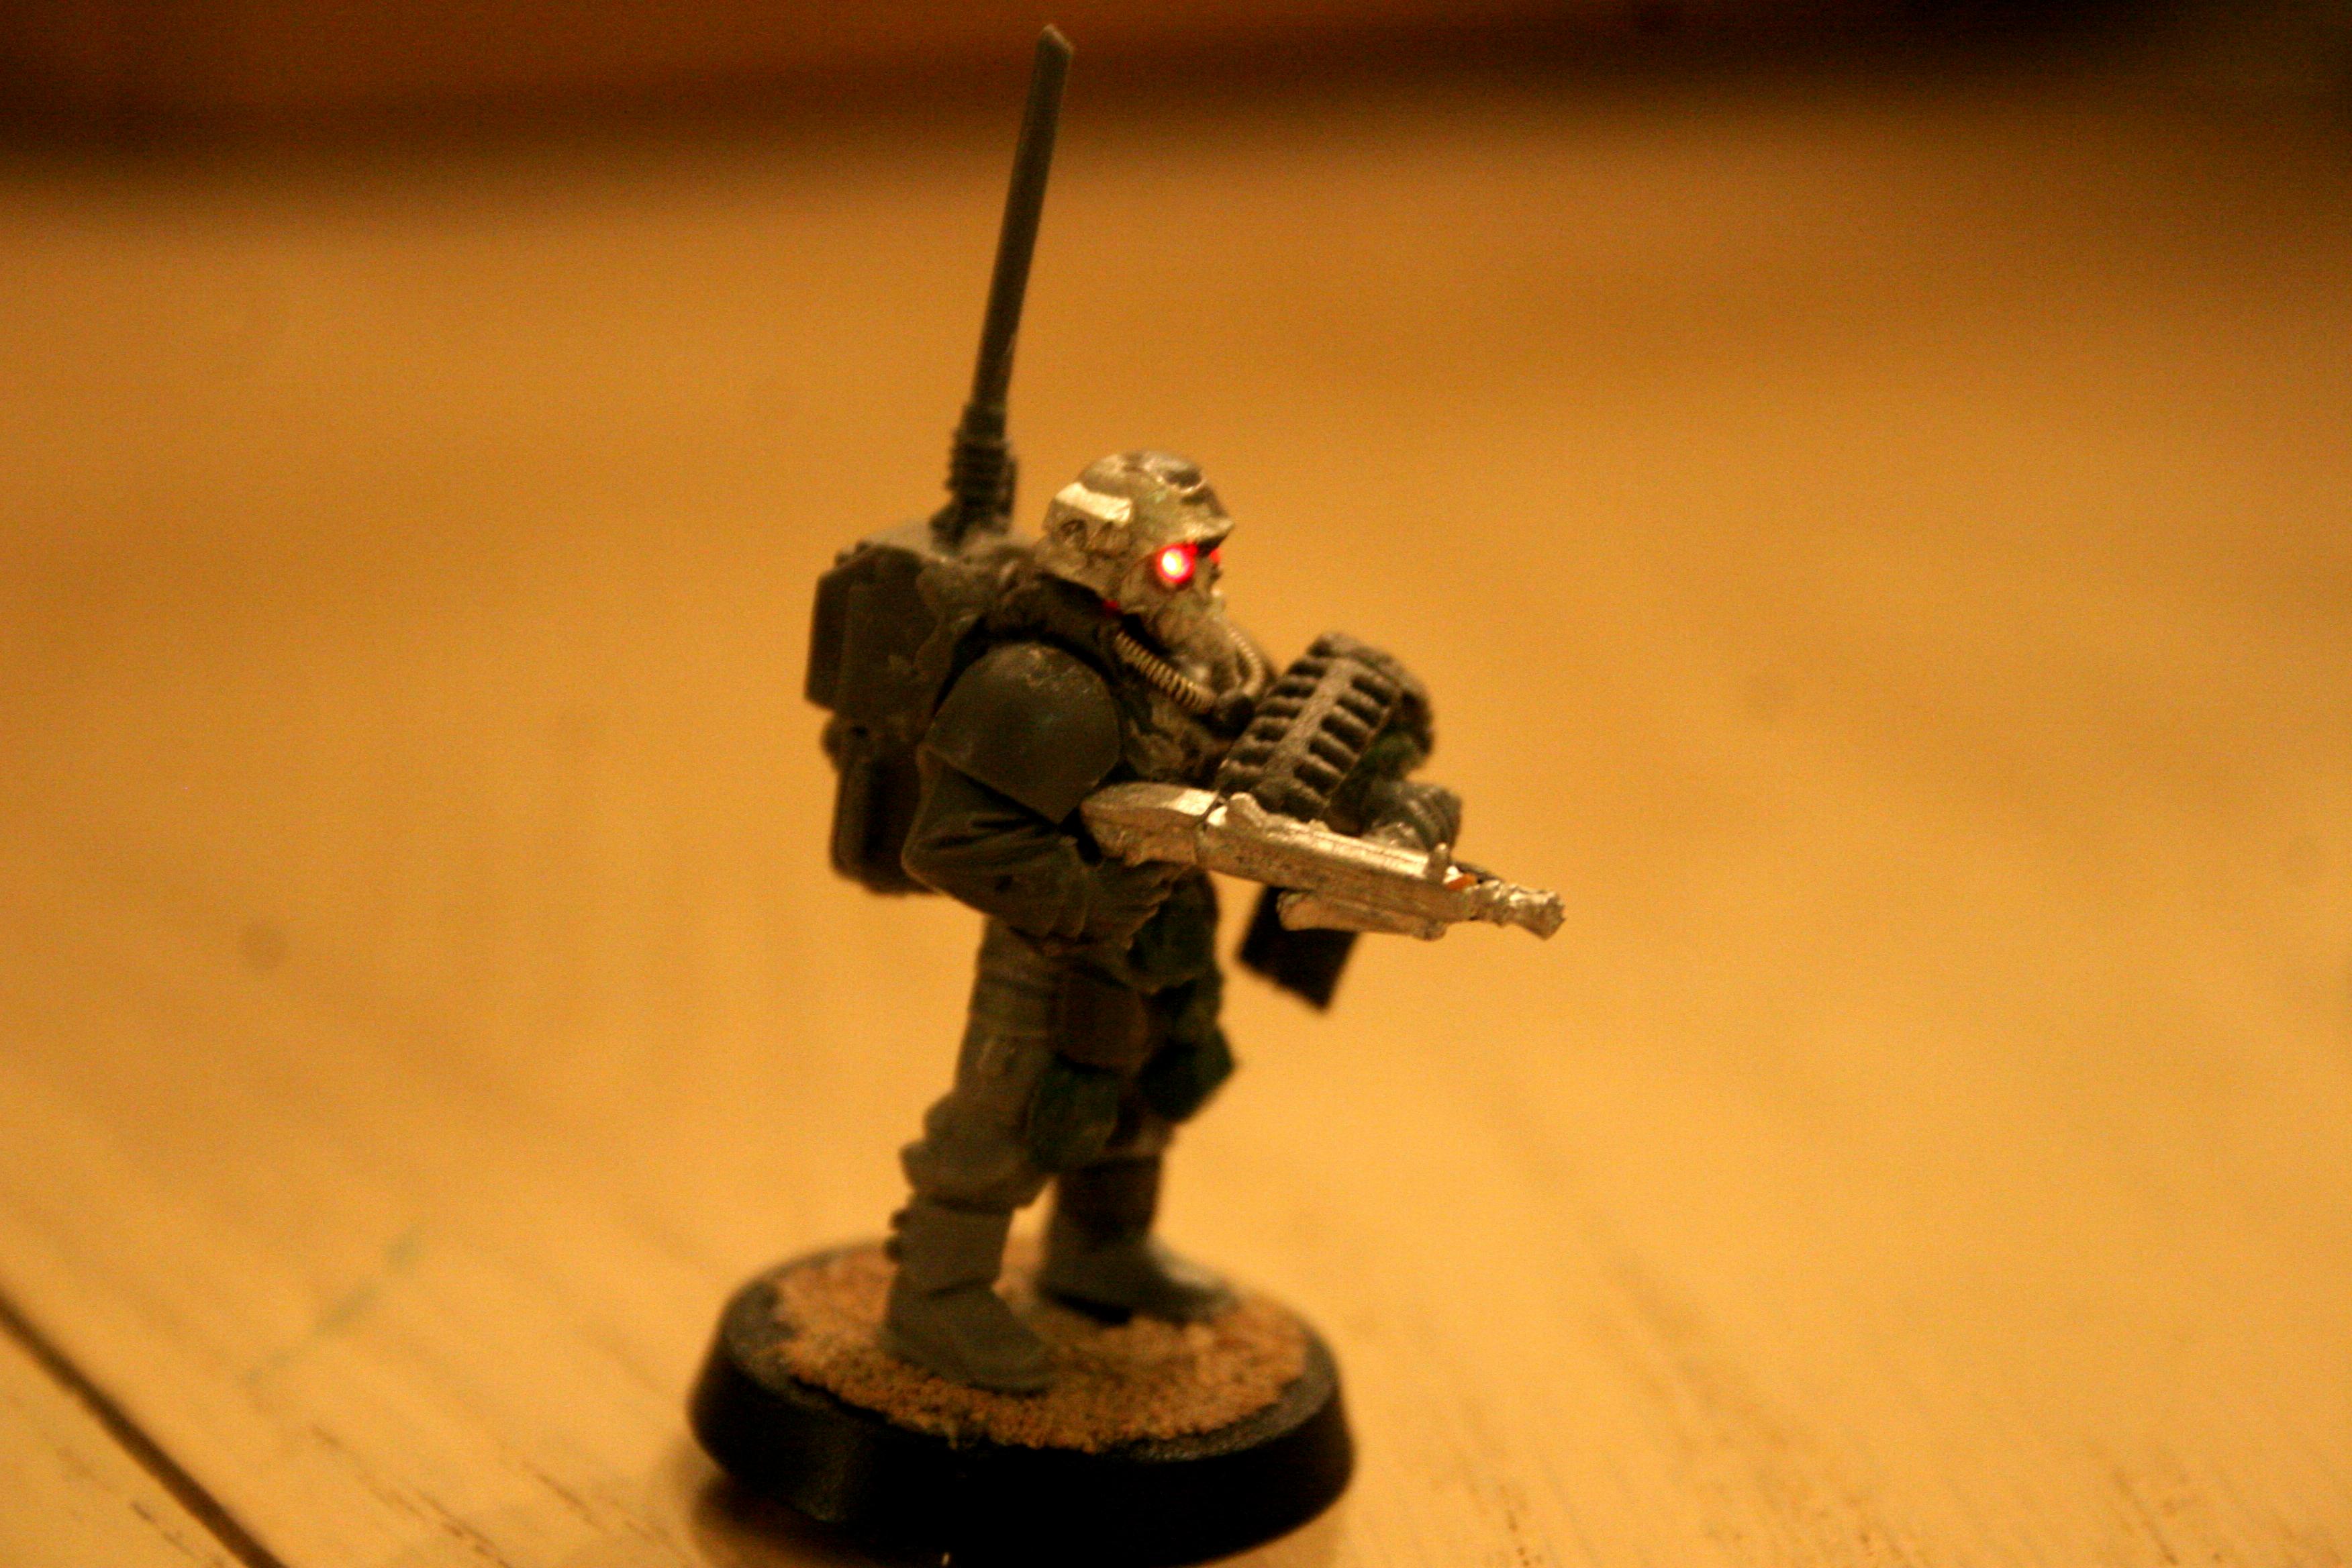 Autogun, Cadians, Imperial Guard, Jin-roh, LED, Lighting, Pig Iron, Storm Troopers, Stormtrooper, Wolf Brigade